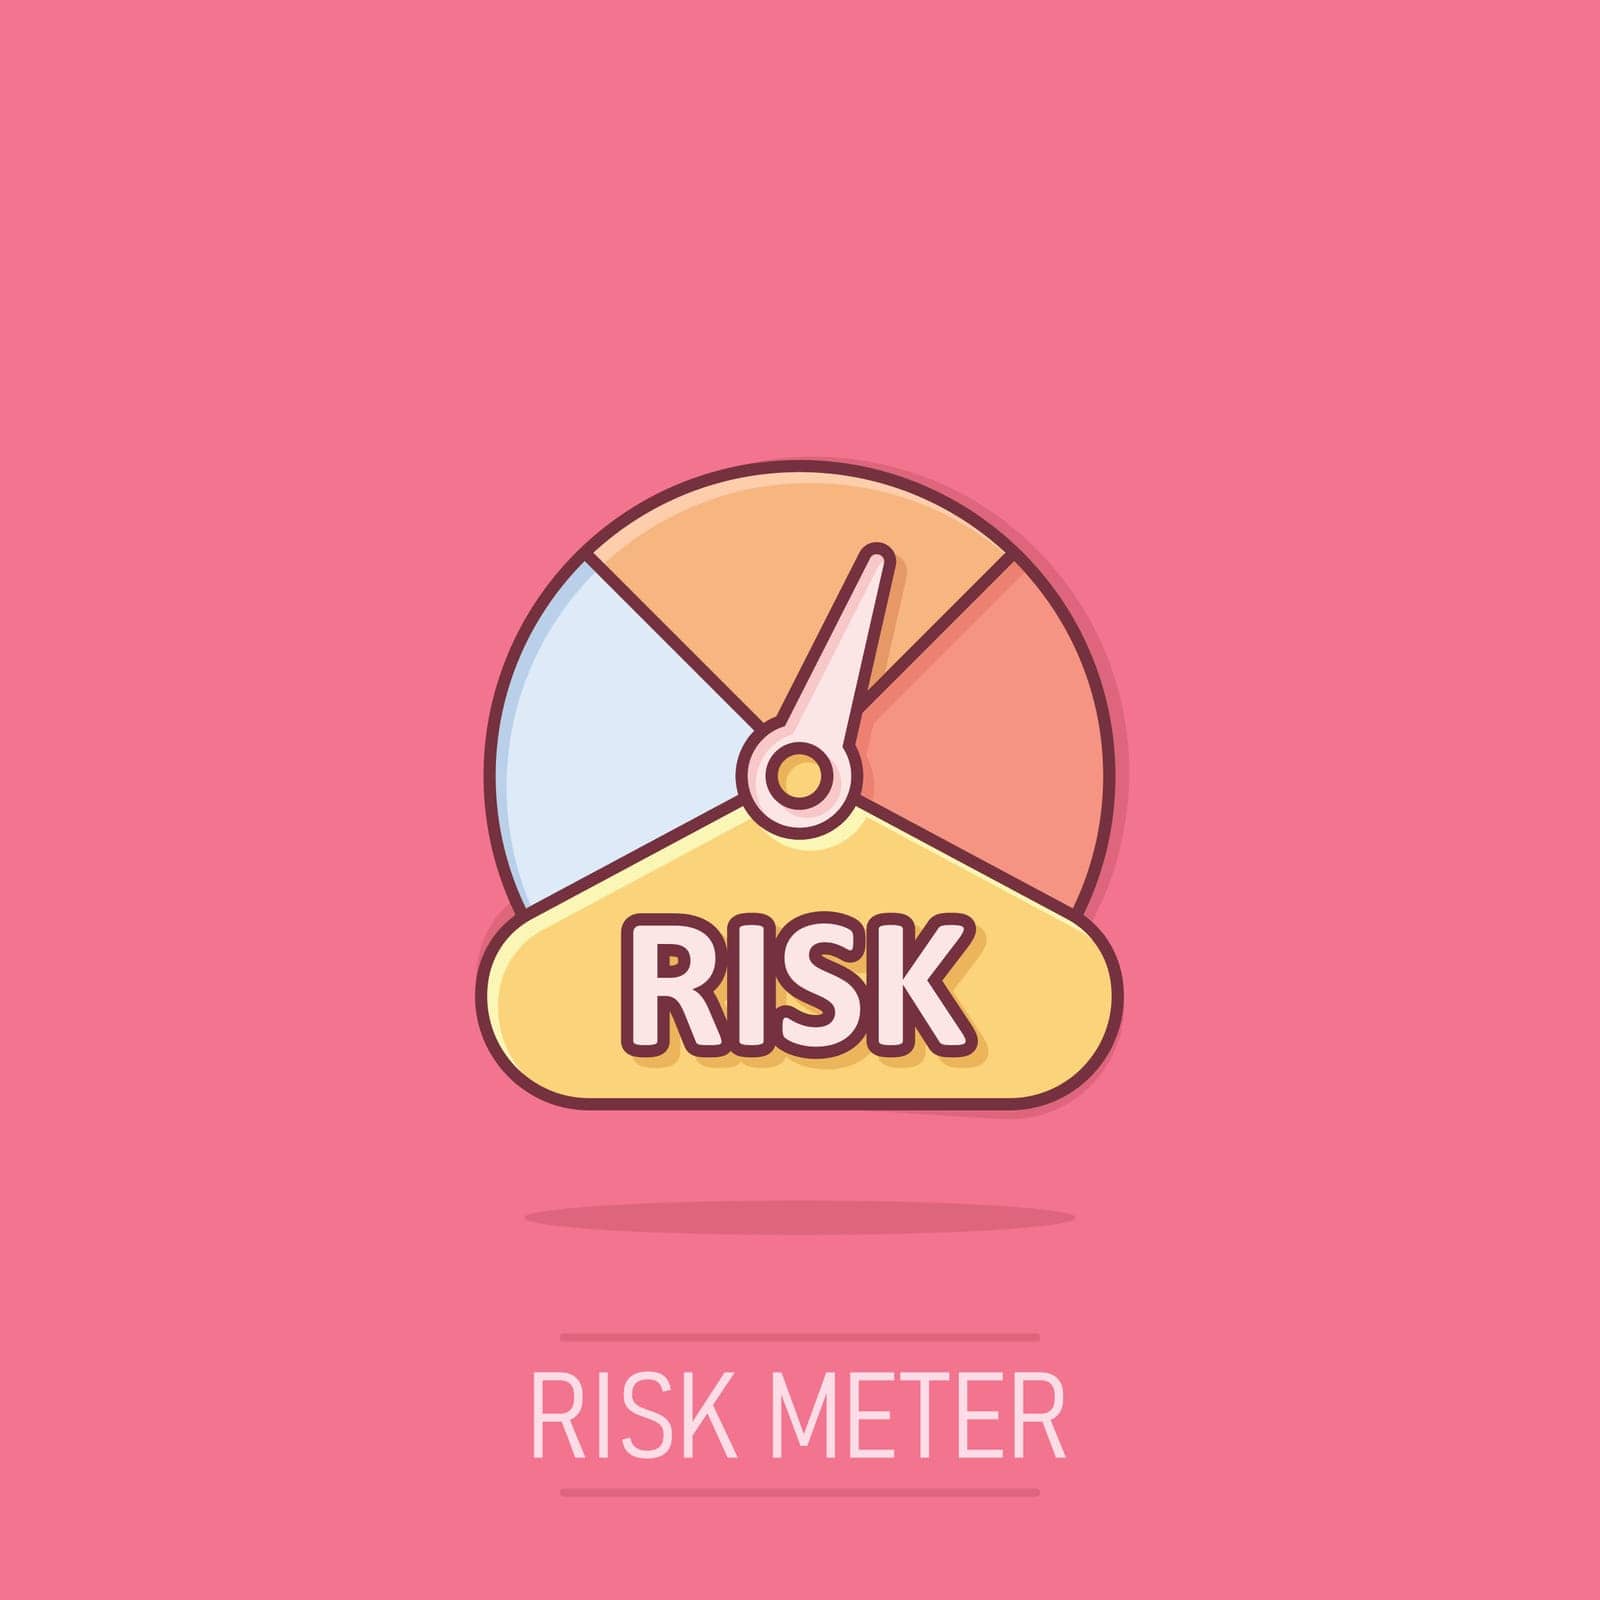 Risk meter icon in comic style. Rating indicator cartoon vector illustration on isolated background. Fuel level sign splash effect business concept. by LysenkoA